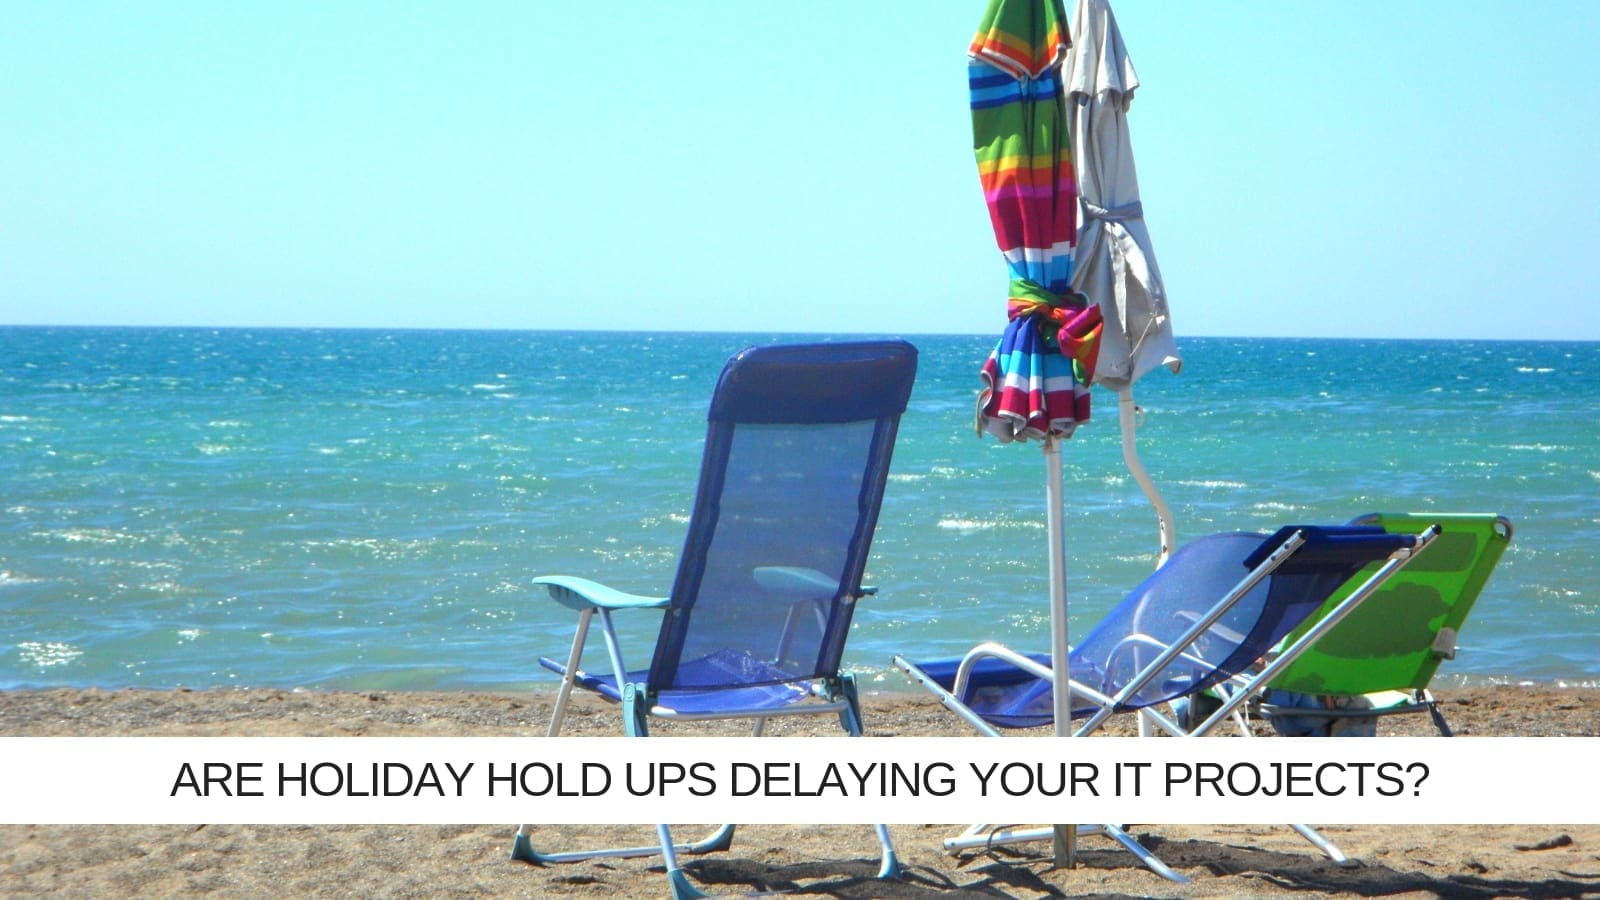 How to prevent holiday hold ups delaying your IT Project!